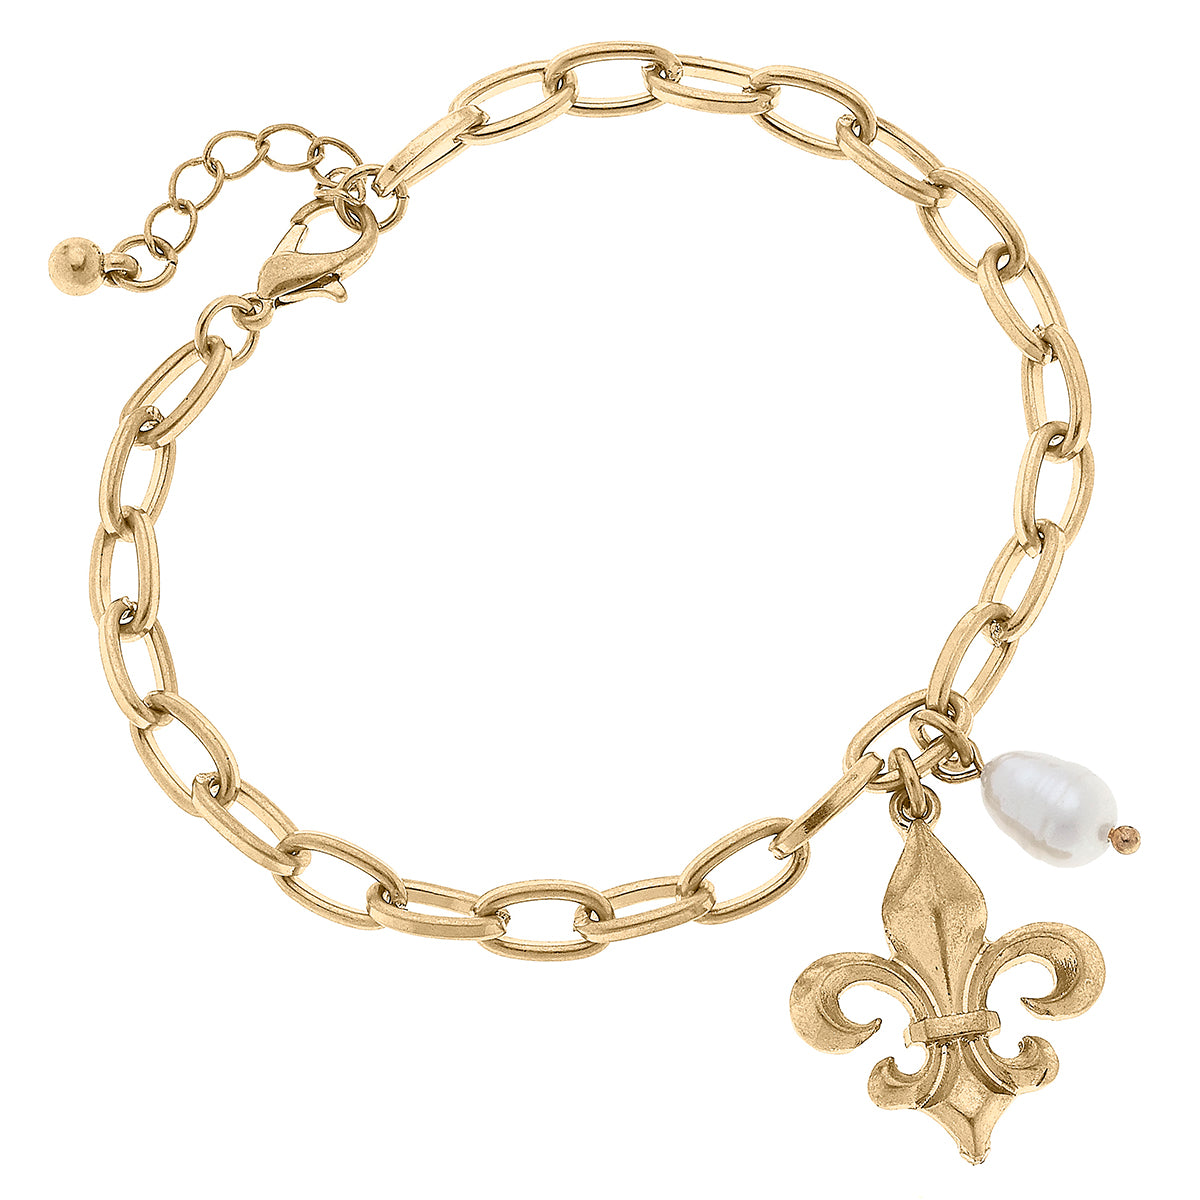 Gold chain bracelet with fleur de lis and pearl charms